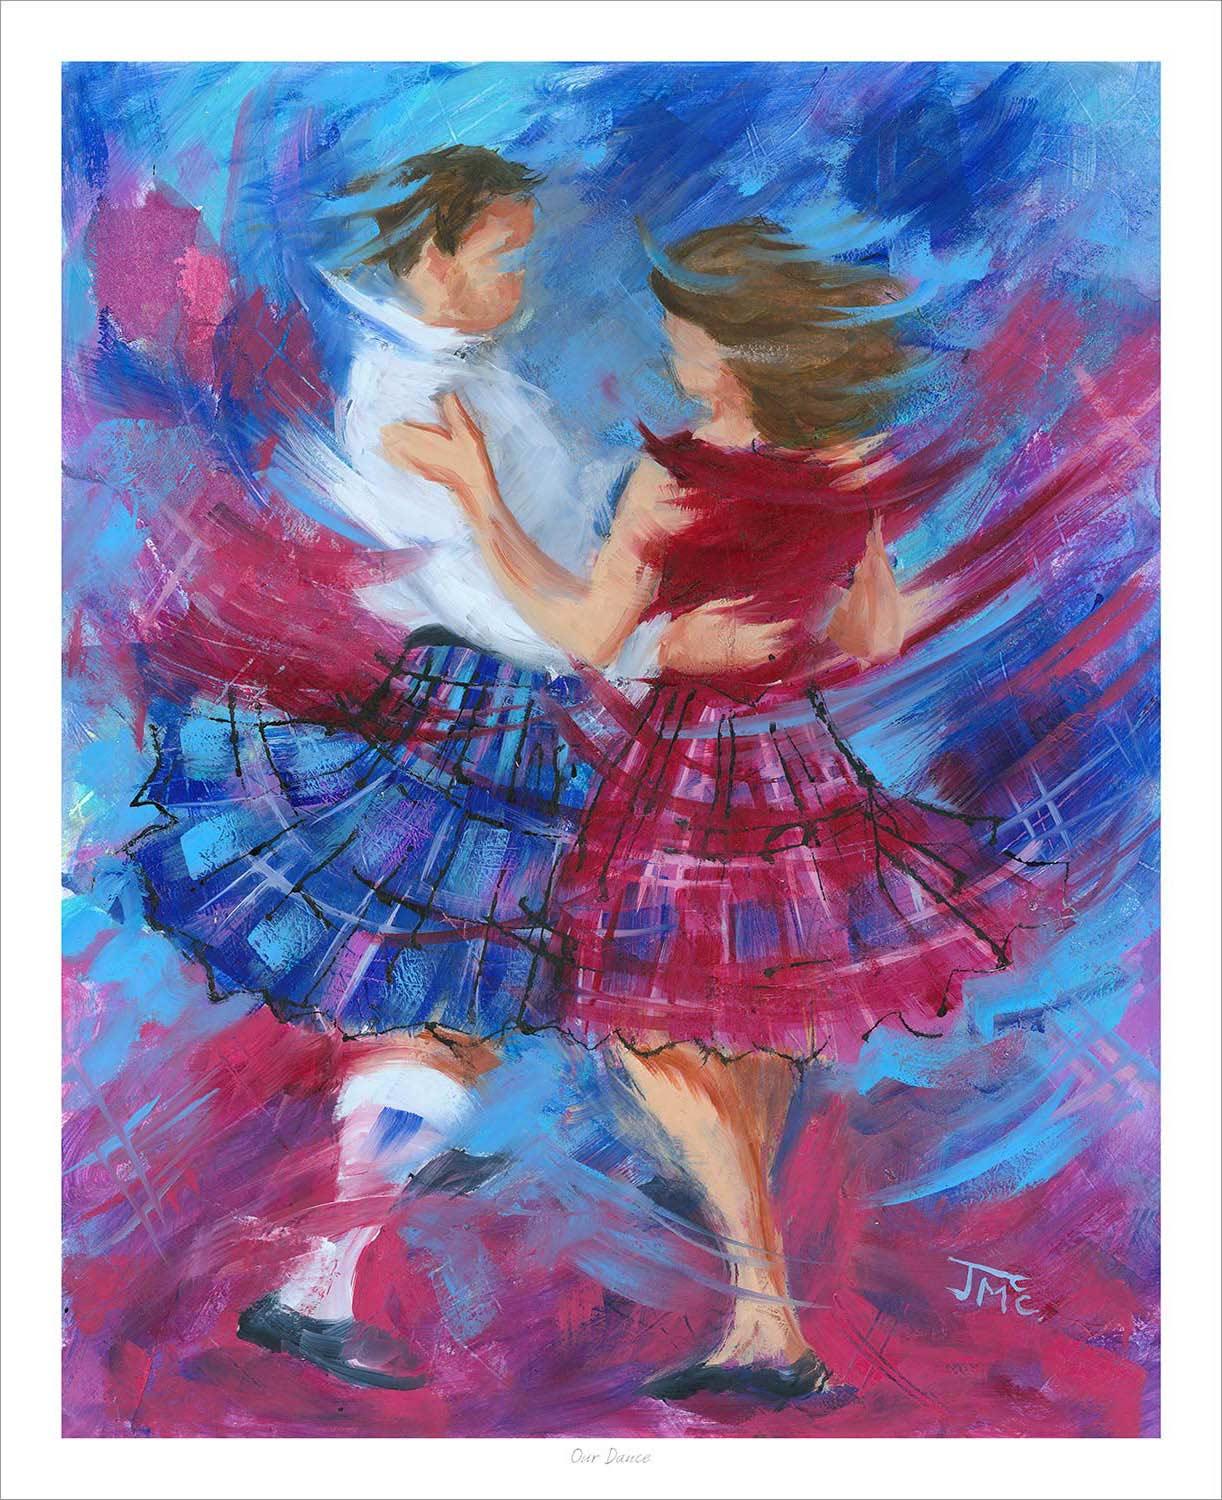 Our Dance Art Print from an original painting by artist Janet McCrorie